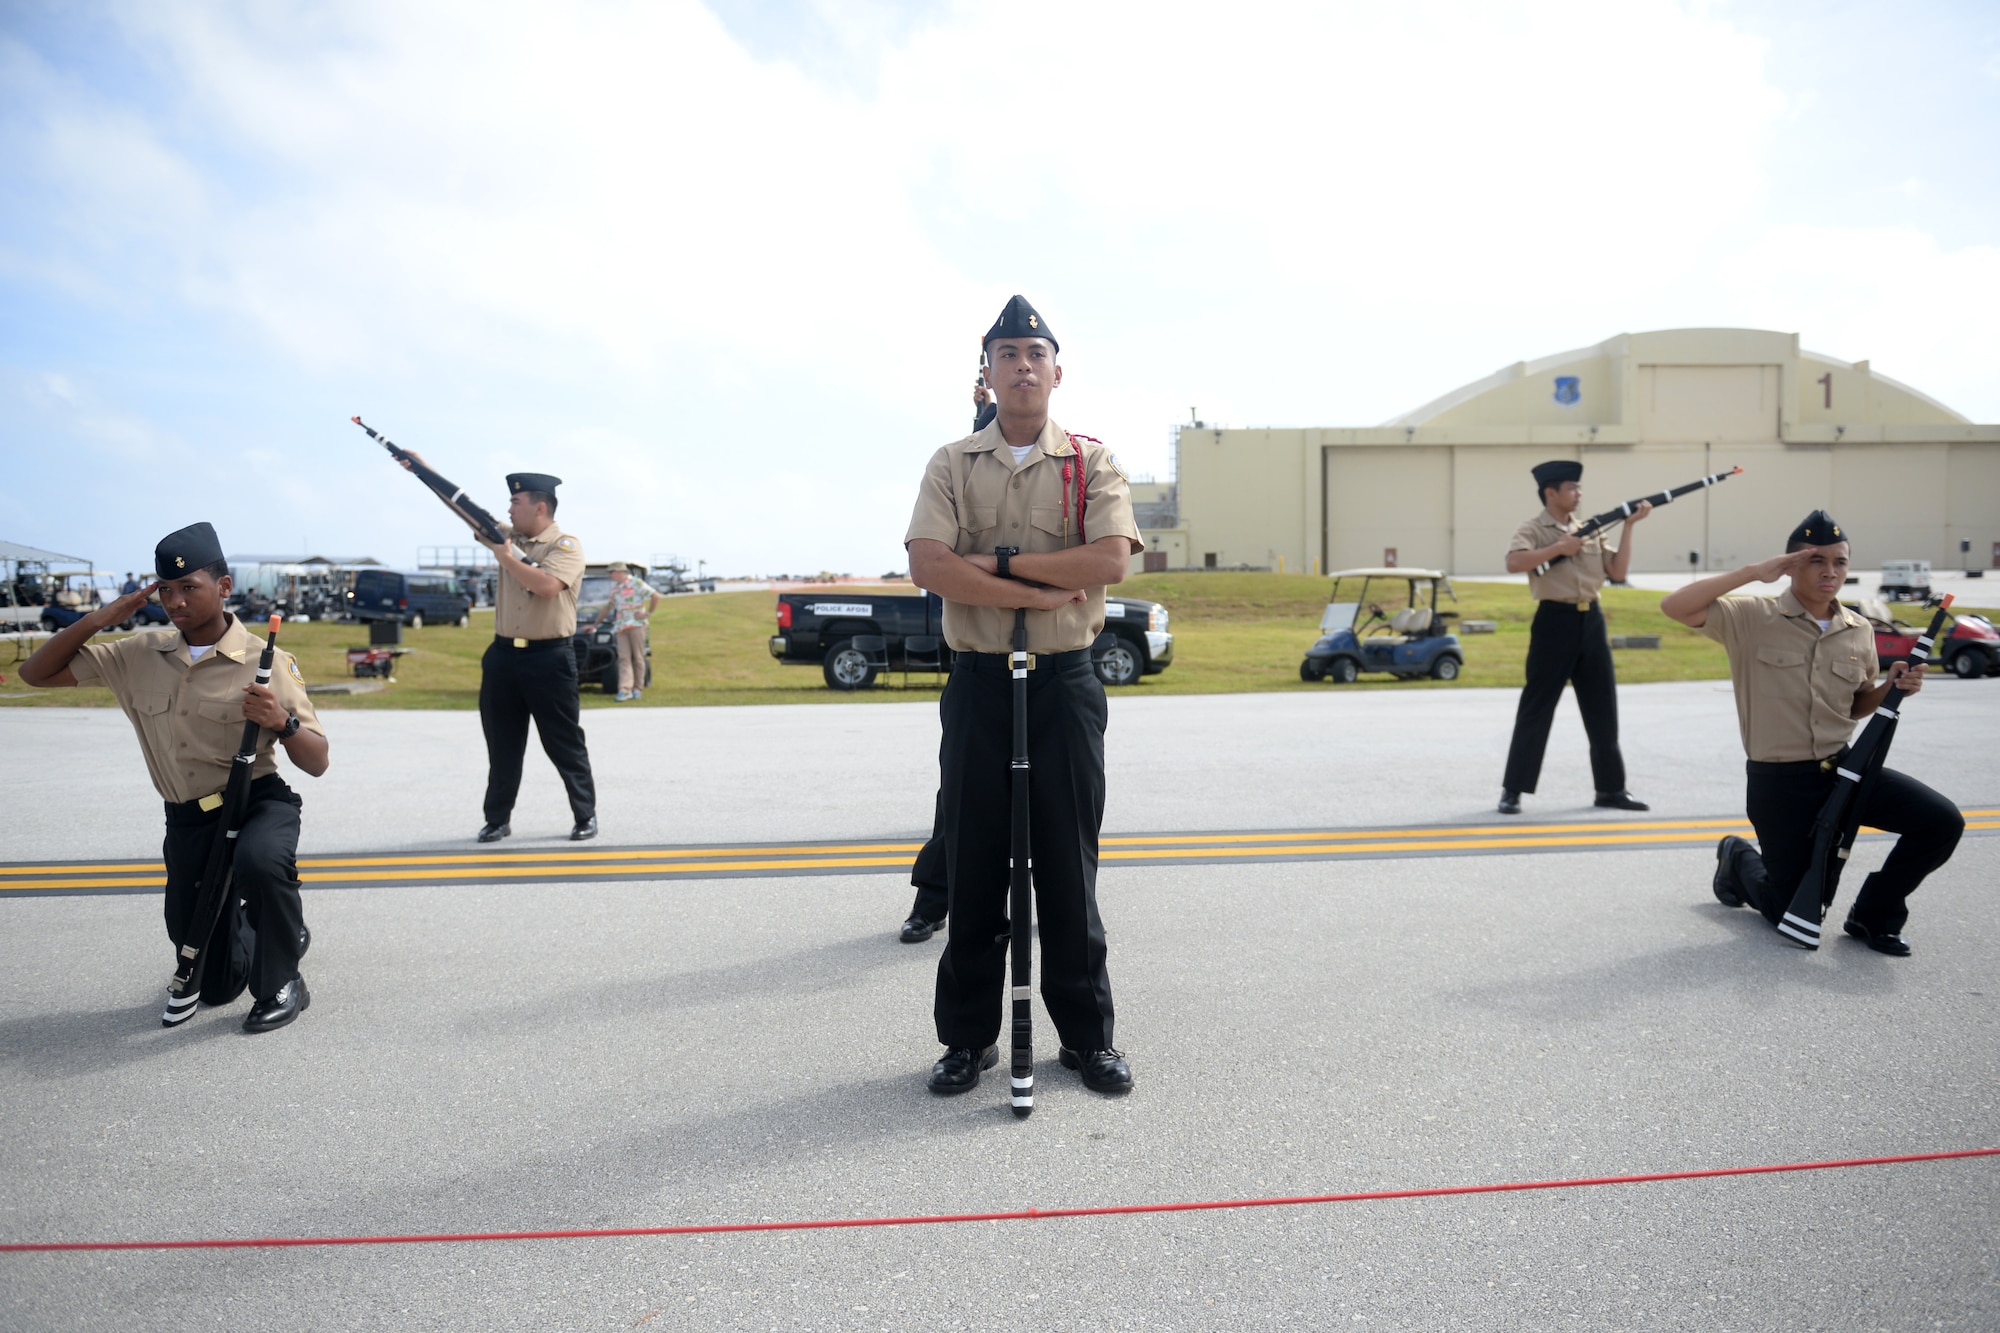 Drill members with the Guam High School Junior Reserve Officer Training Corps finish their routine Feb. 20 during the 2016 Pacific Air Partners Open House at Andersen Air Force Base, Guam.  In addition to their presentation, drill teams from Okkodo High School and John F. Kennedy High School performed for the crowd during the open house. (U.S. Air Force photo/Senior Airman Joshua Smoot)